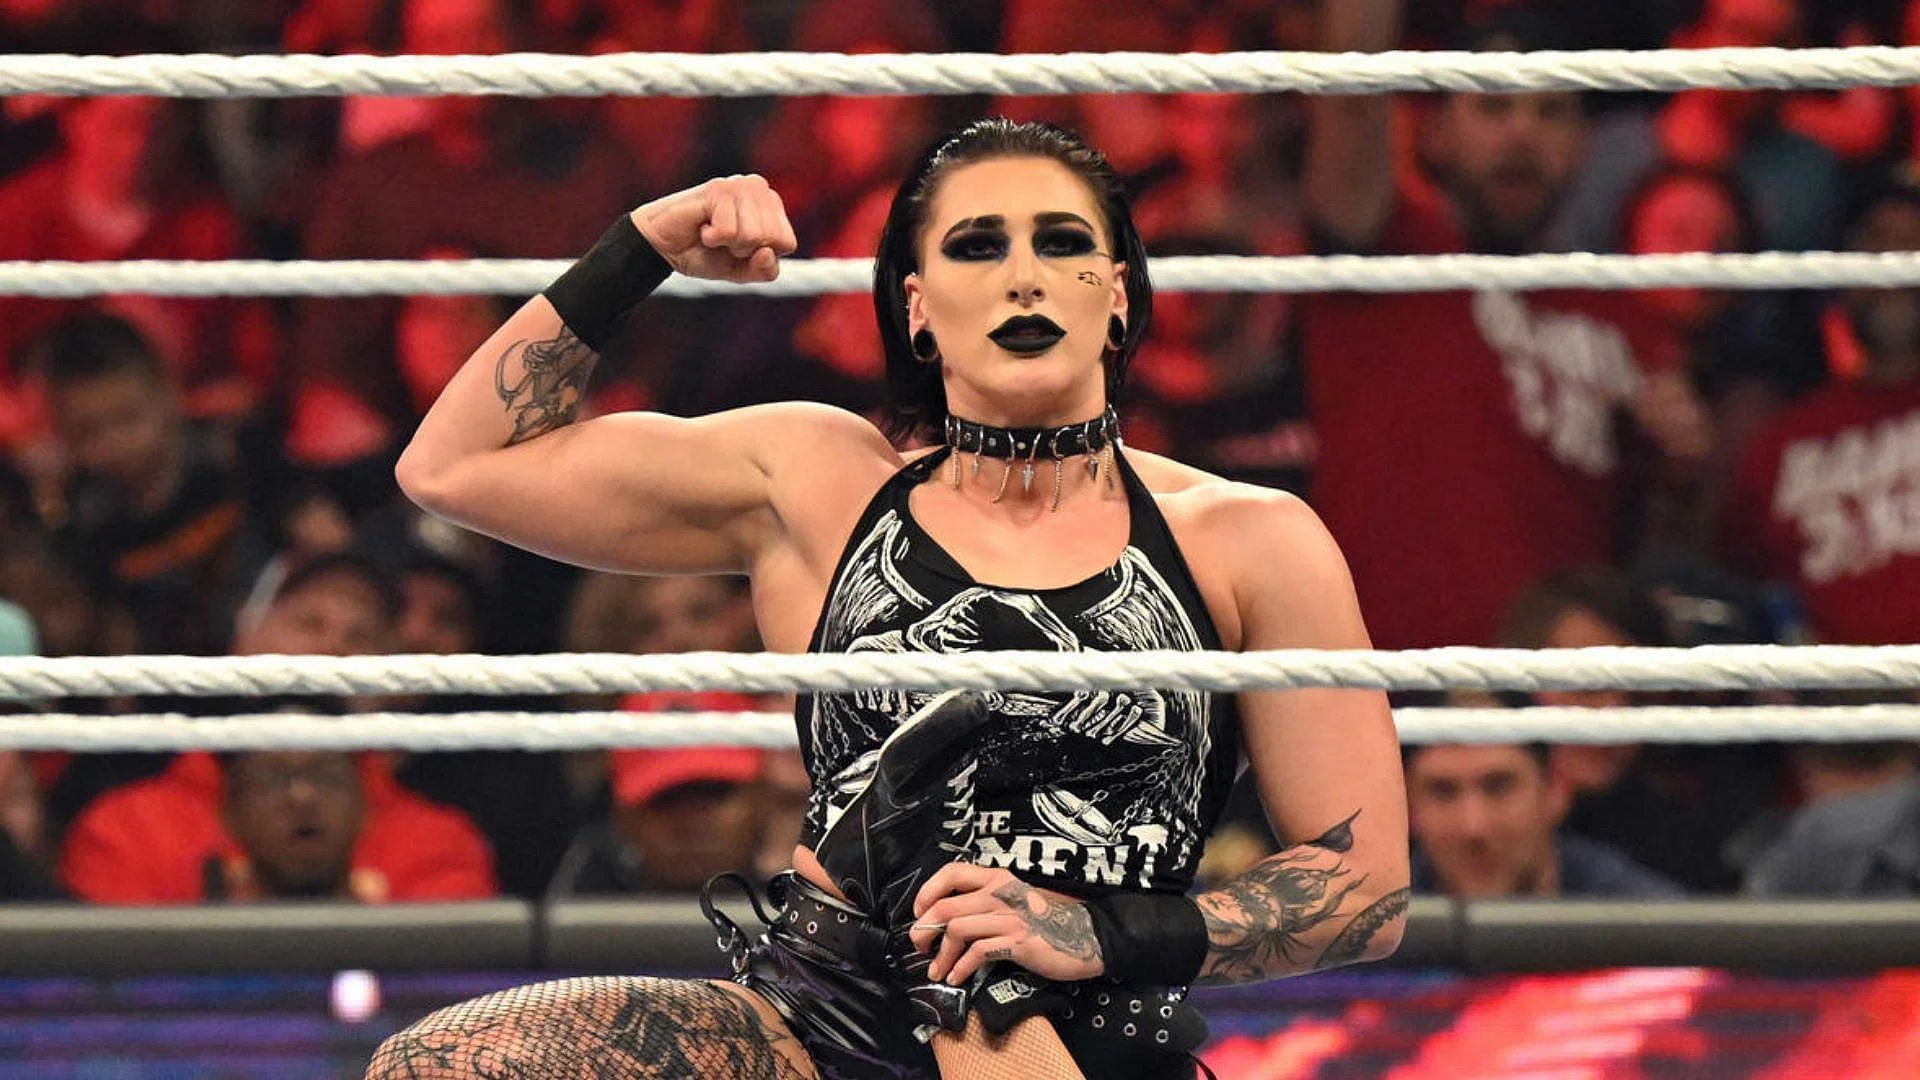 WWE News - Road To WrestleMania Live Event Notes, Rhea Ripley's Physical Stats